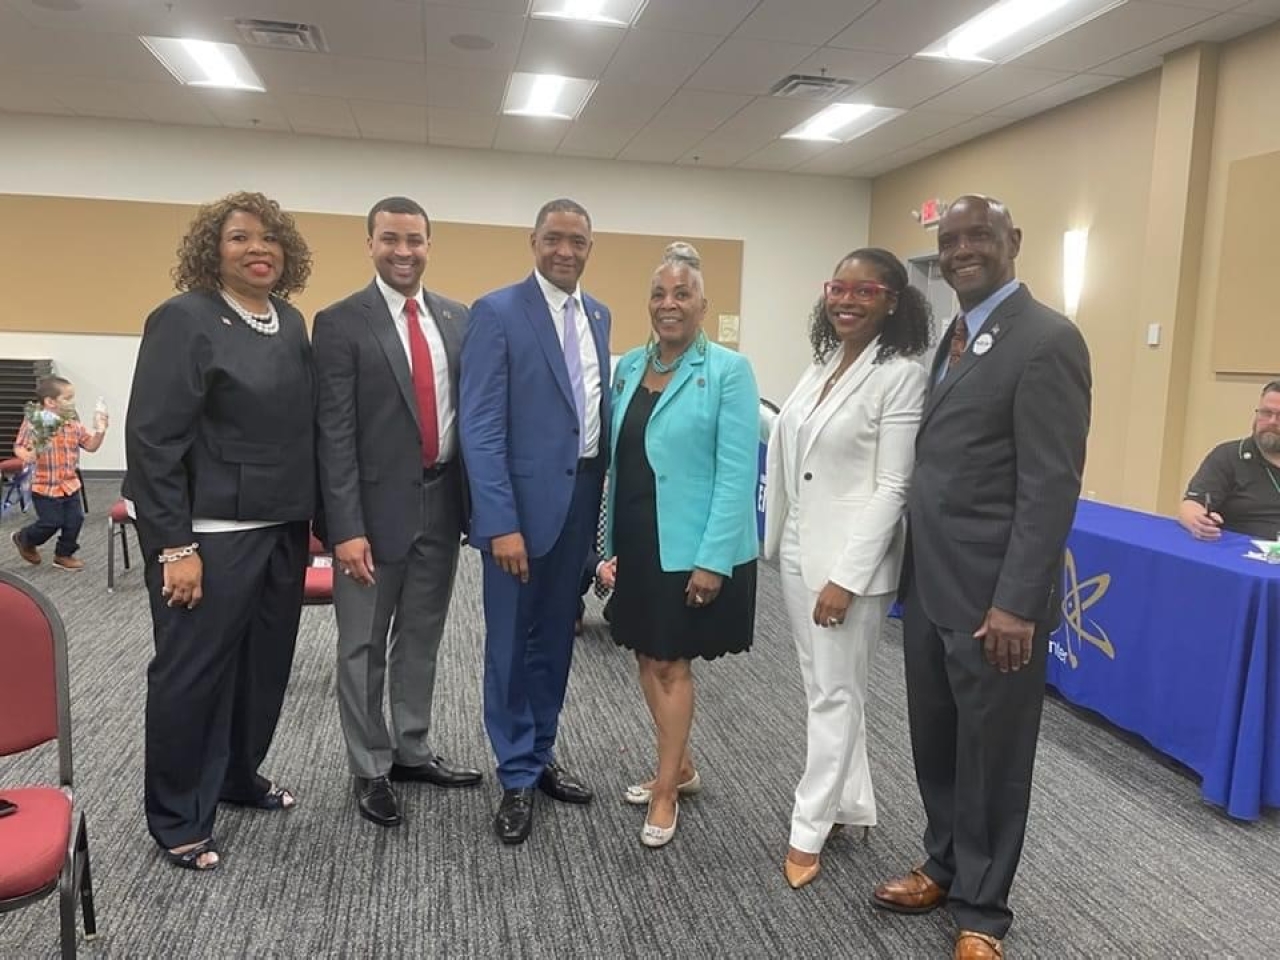 Reps. Ingram, Sykes, and Denson meet with Cedric Richmond, Director of the White House Office of Public Engagement, along with Sen. Cecil Thomas and Commissioner Stephanie Summerow Douglas